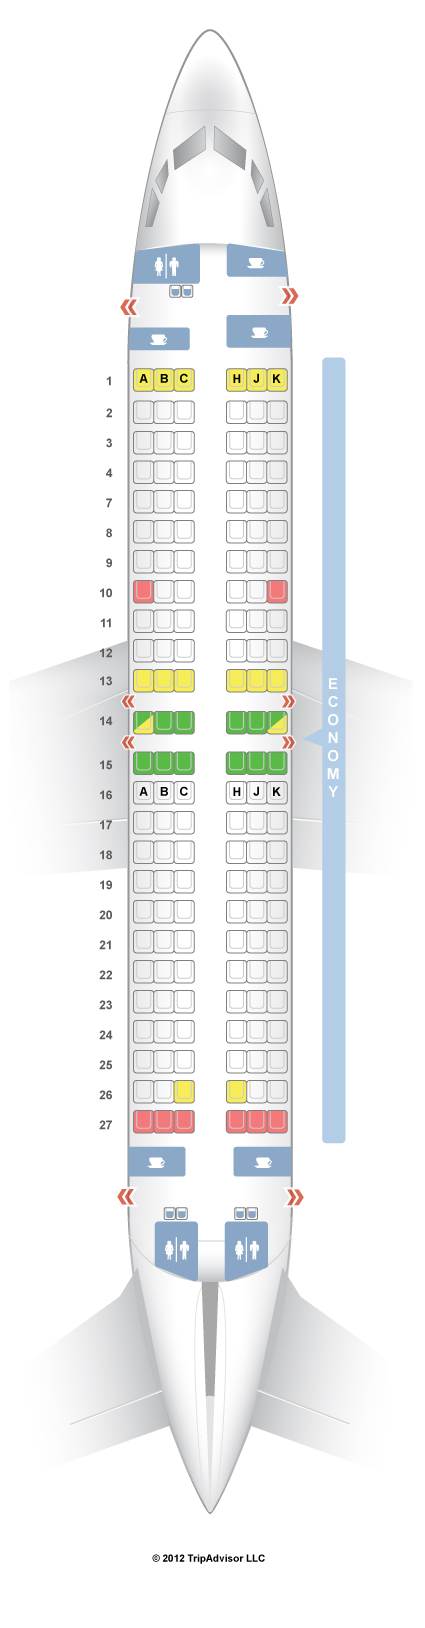 Boeing 737 400 Seating Chart